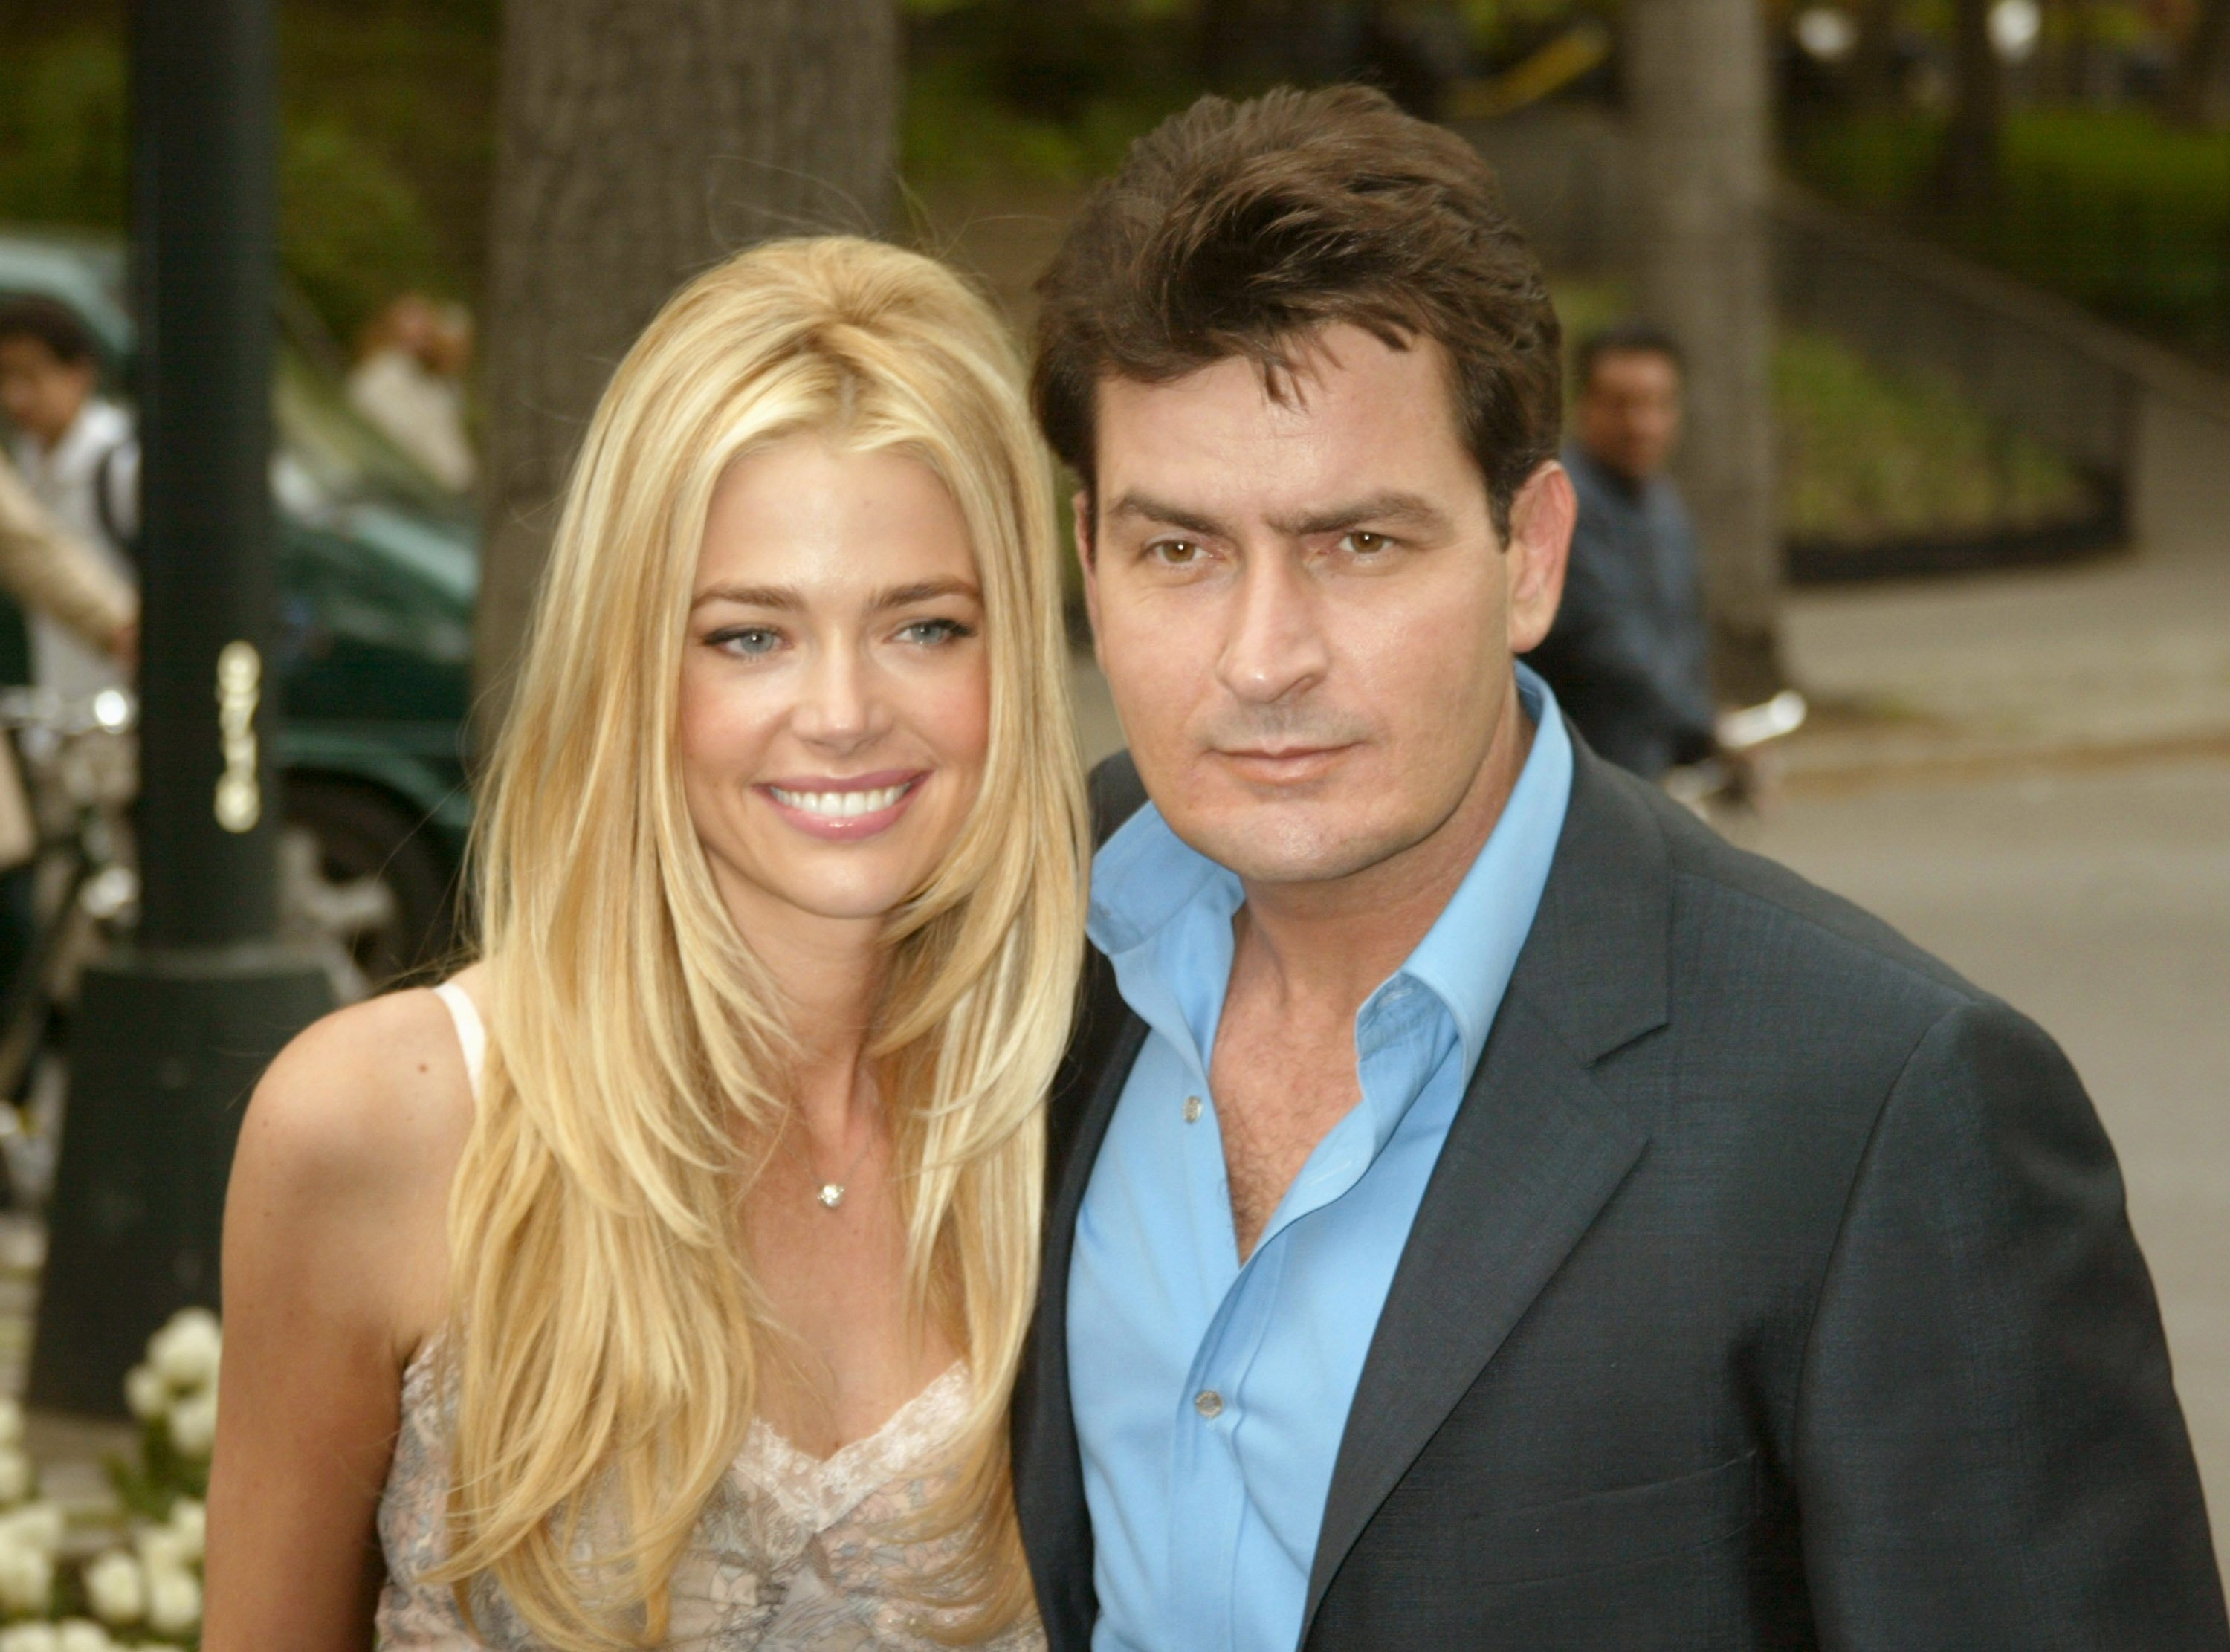 Denise Richards and Charlie Sheen at the Tavern on the Green in New York City, New York. | Source: Getty Images